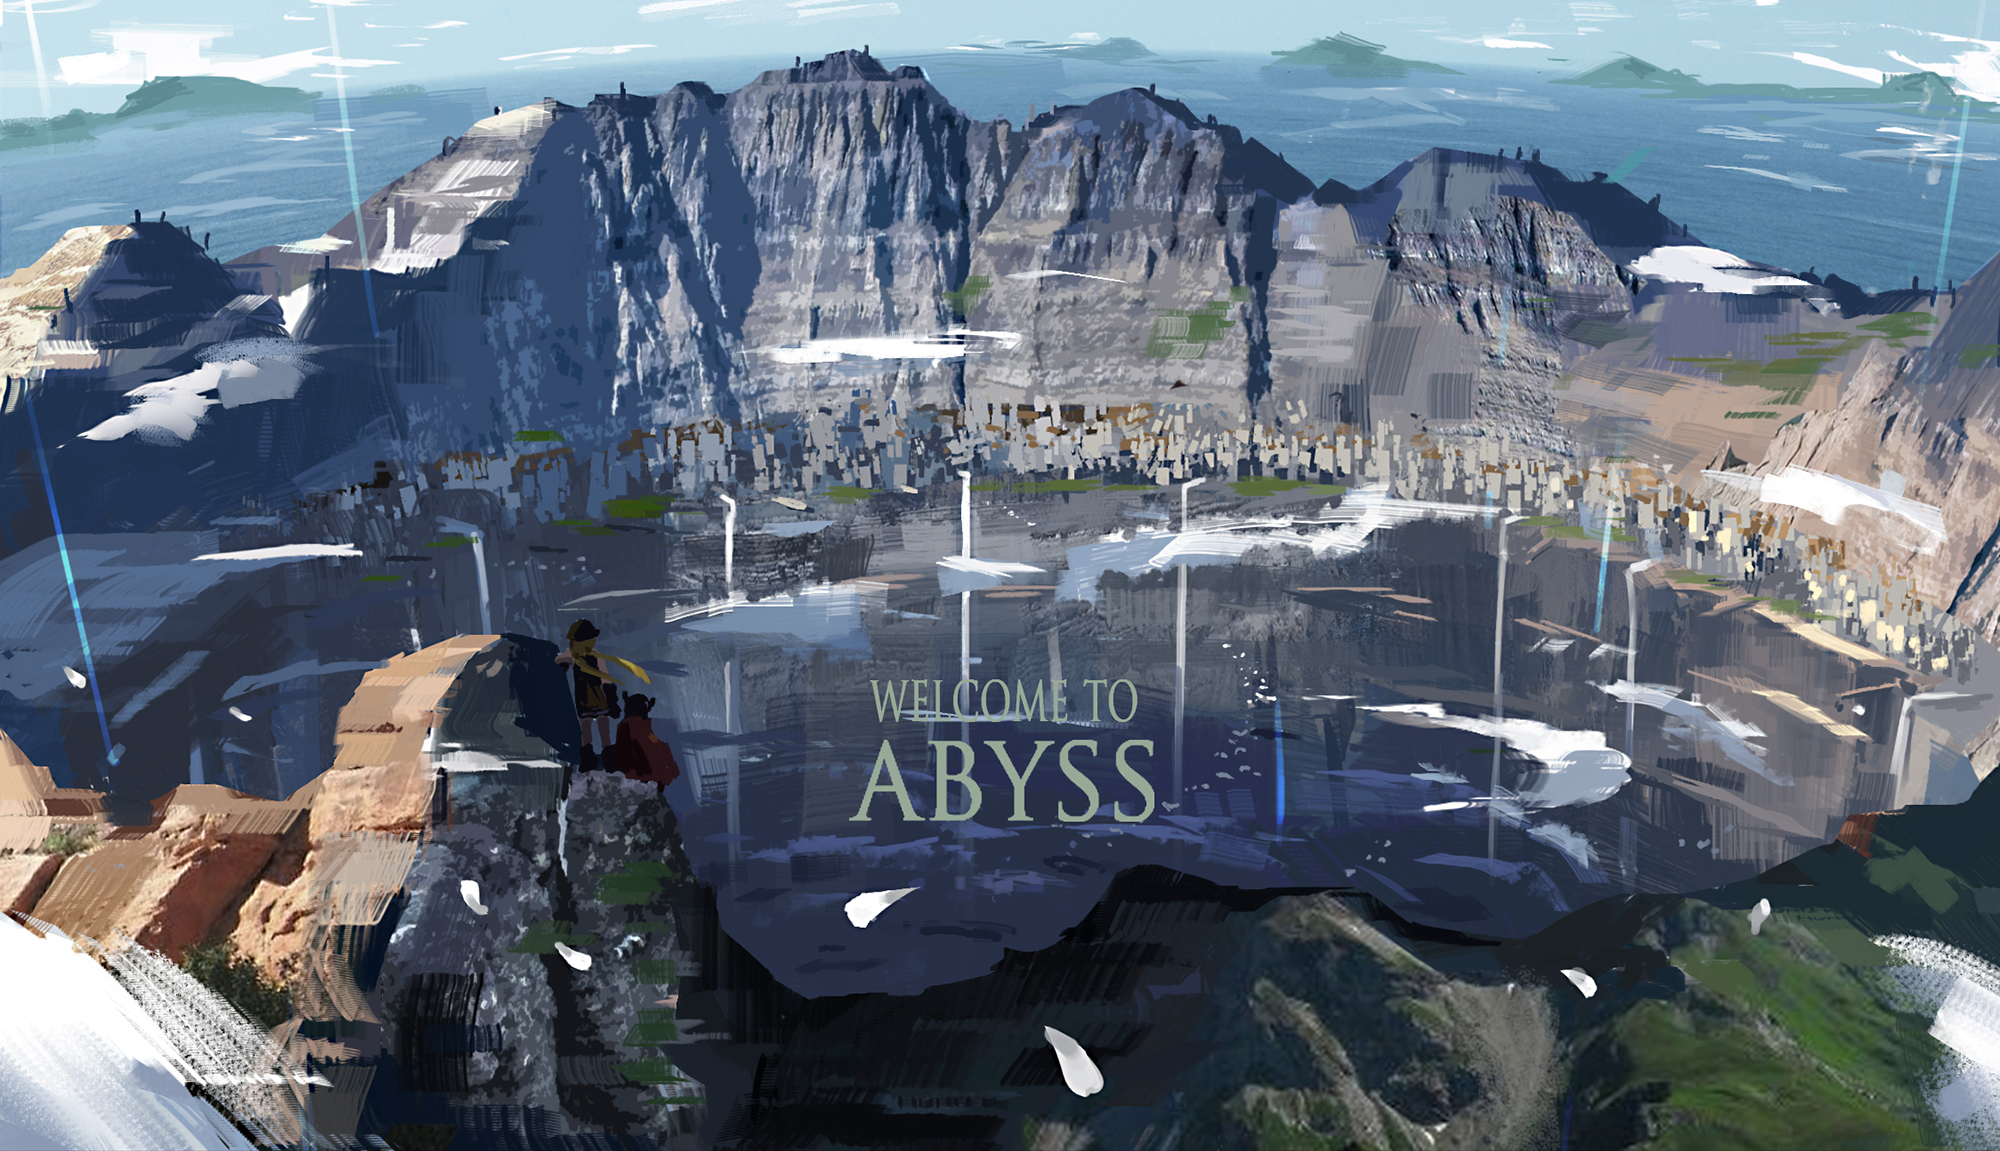 Welcome to Abyss by 科学